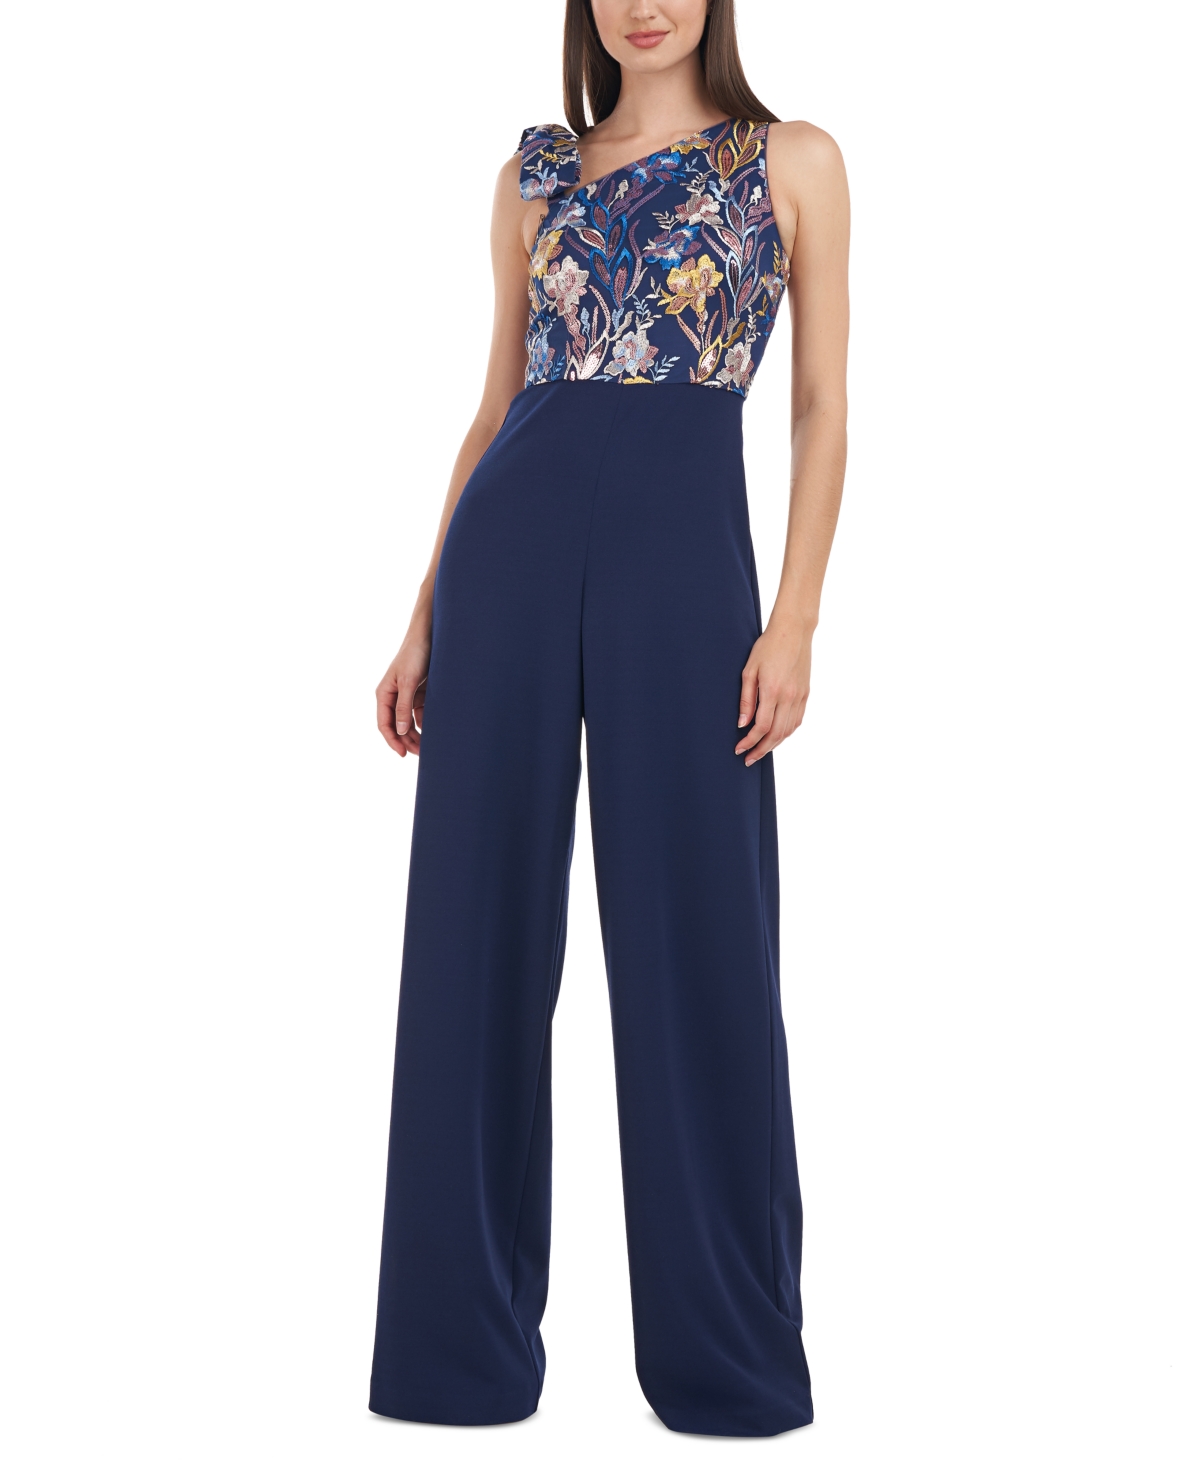 Js Collections Women's Floral Embroidered Palazzo Jumpsuit